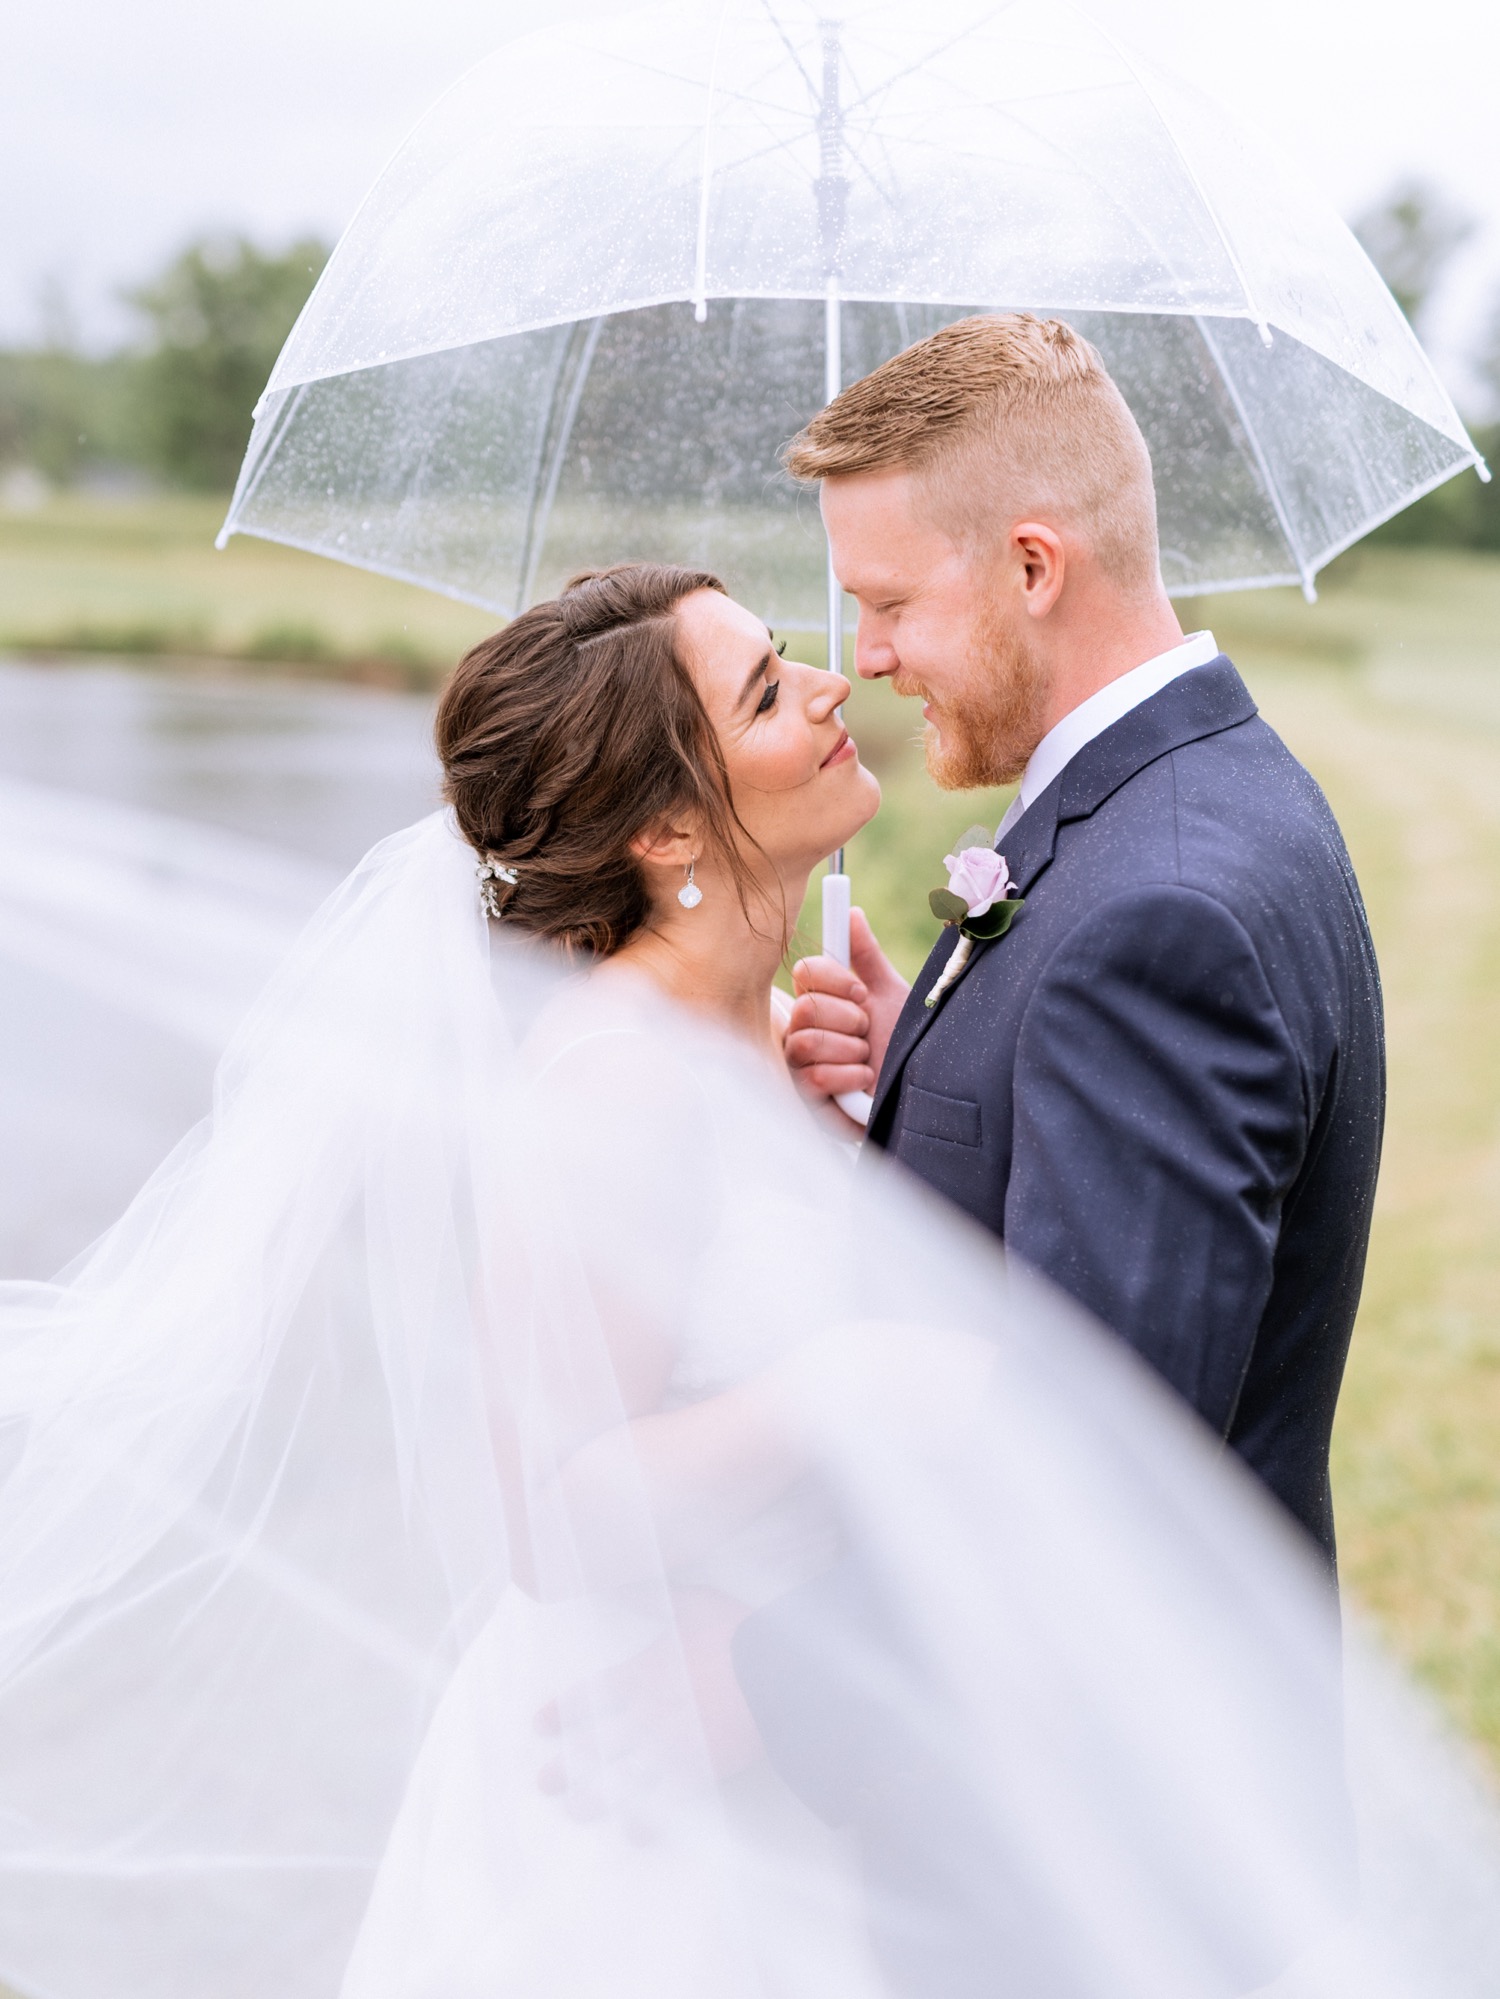 Bride and groom kissing in the rain after wedding ceremony in Charlottesville, VA